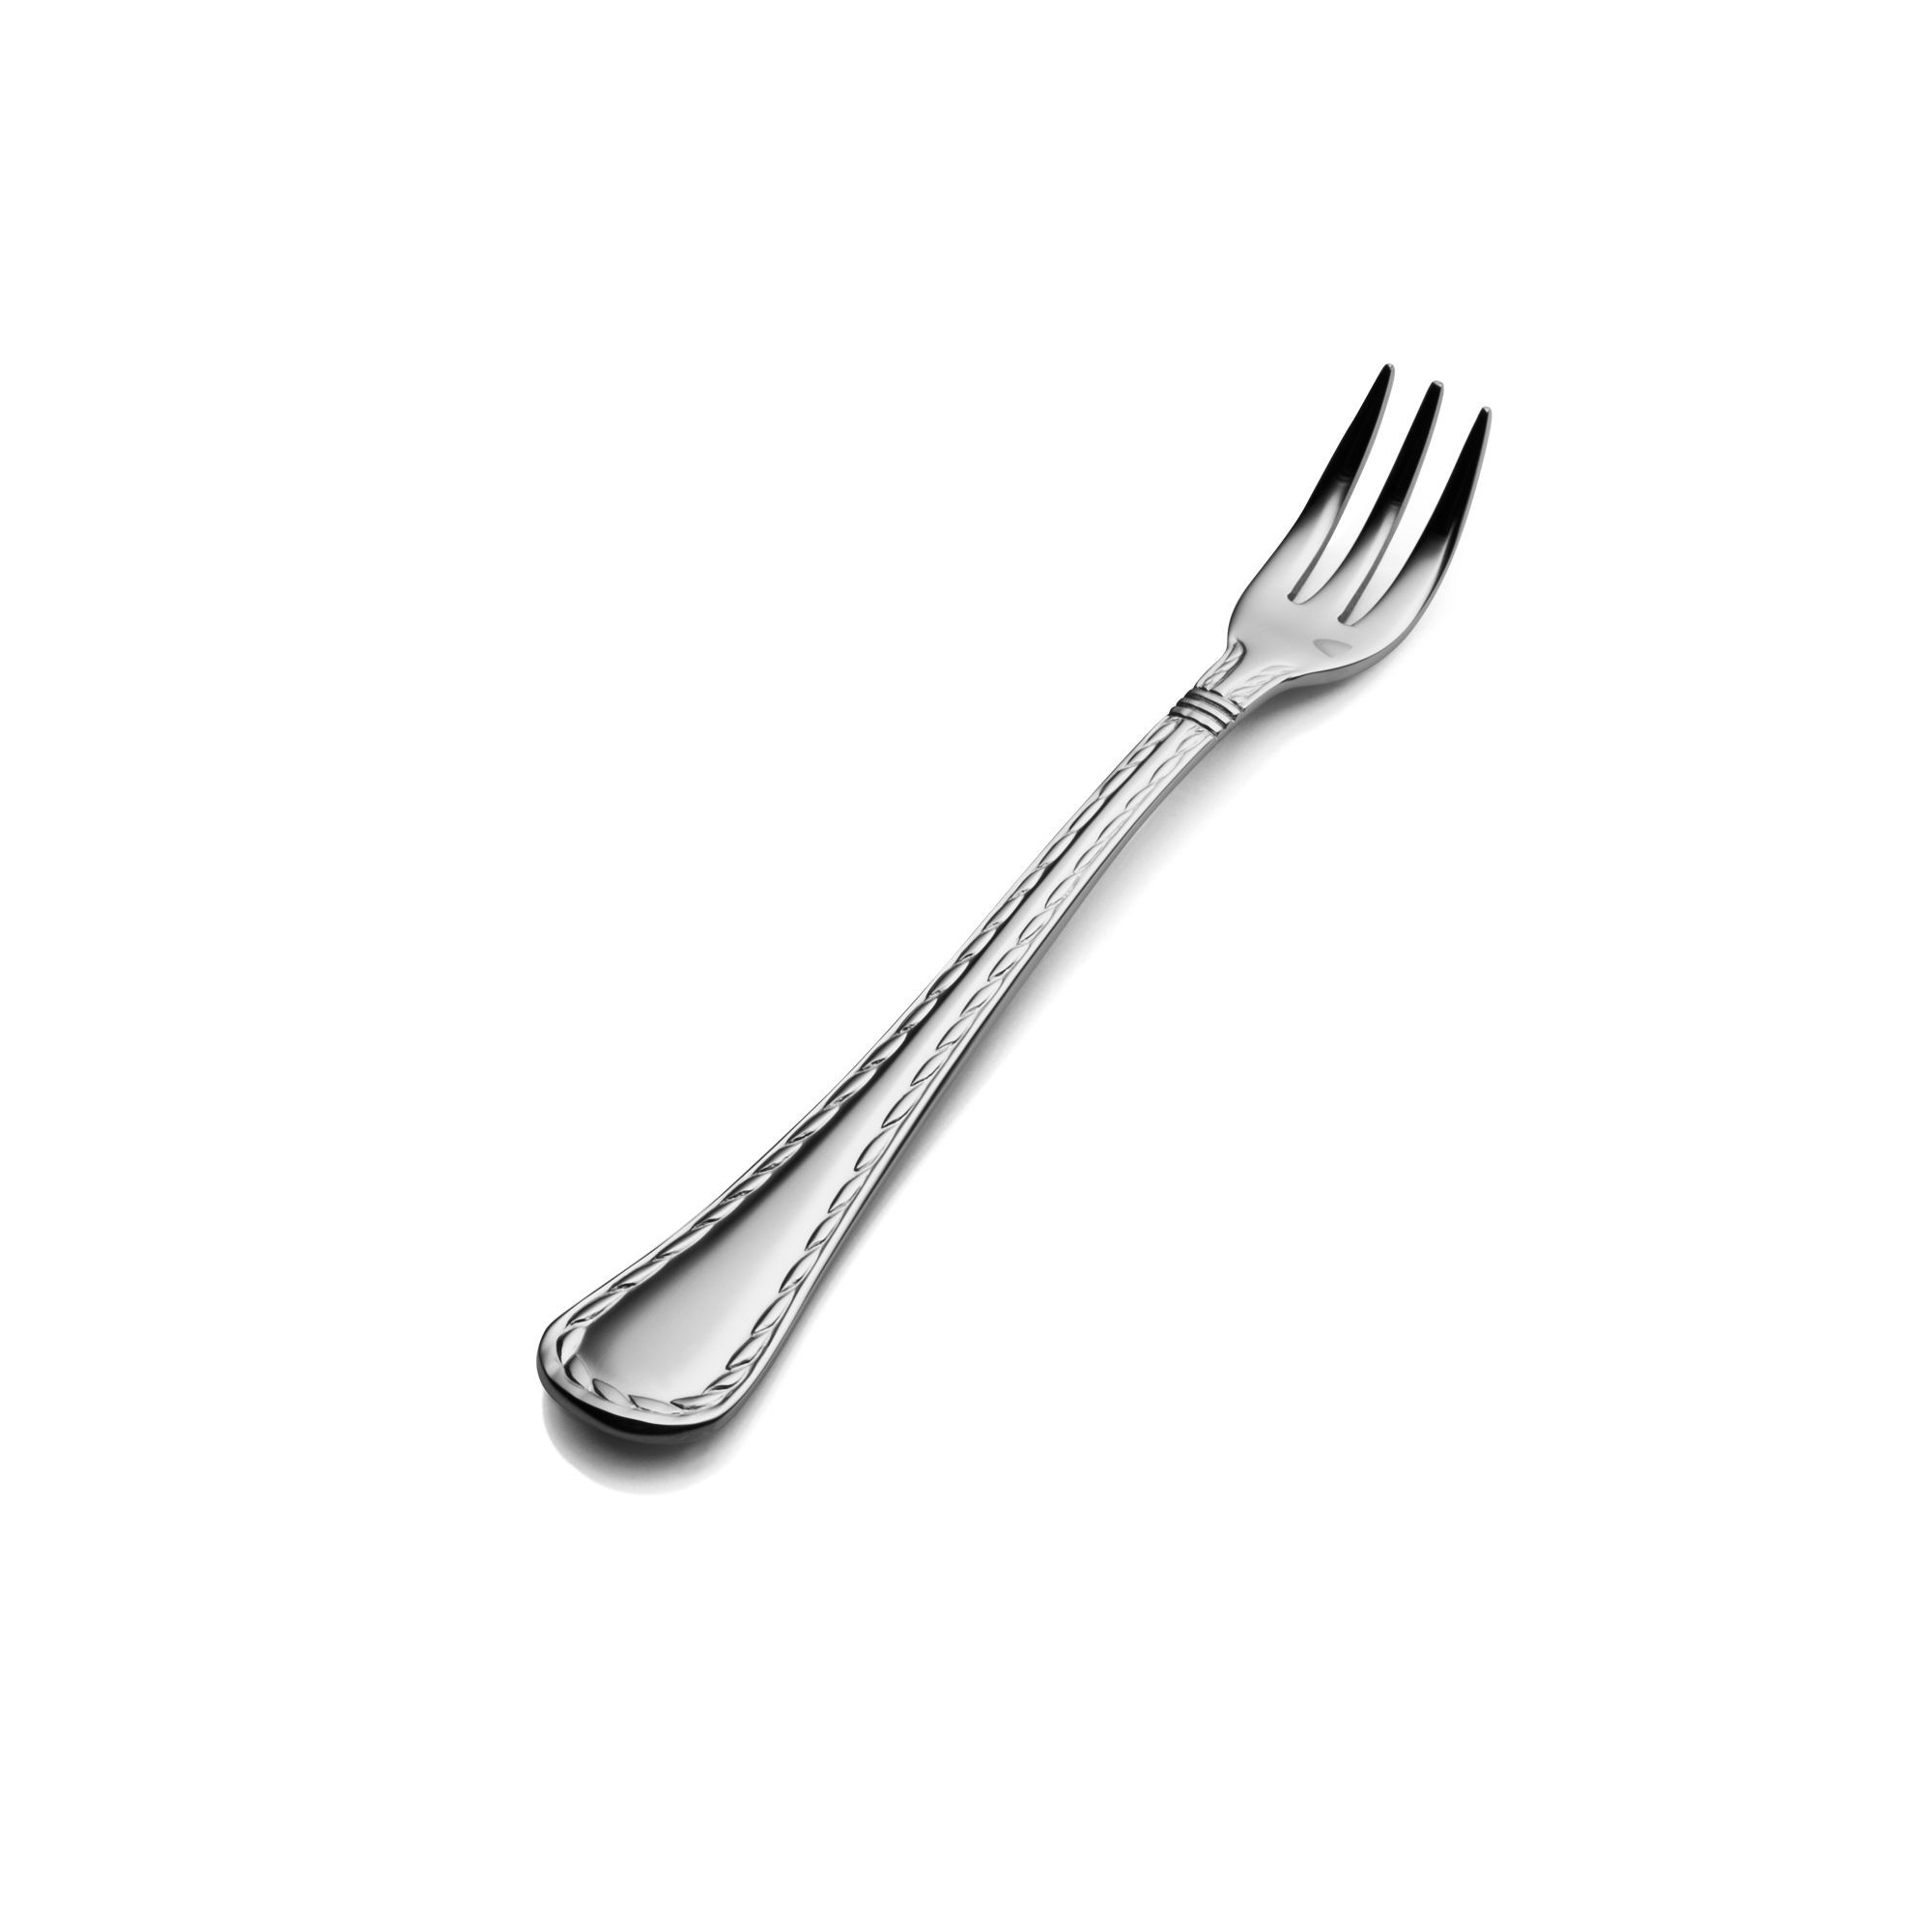 Bon Chef S408 Amore 18/8 Stainless Steel Oyster Fork